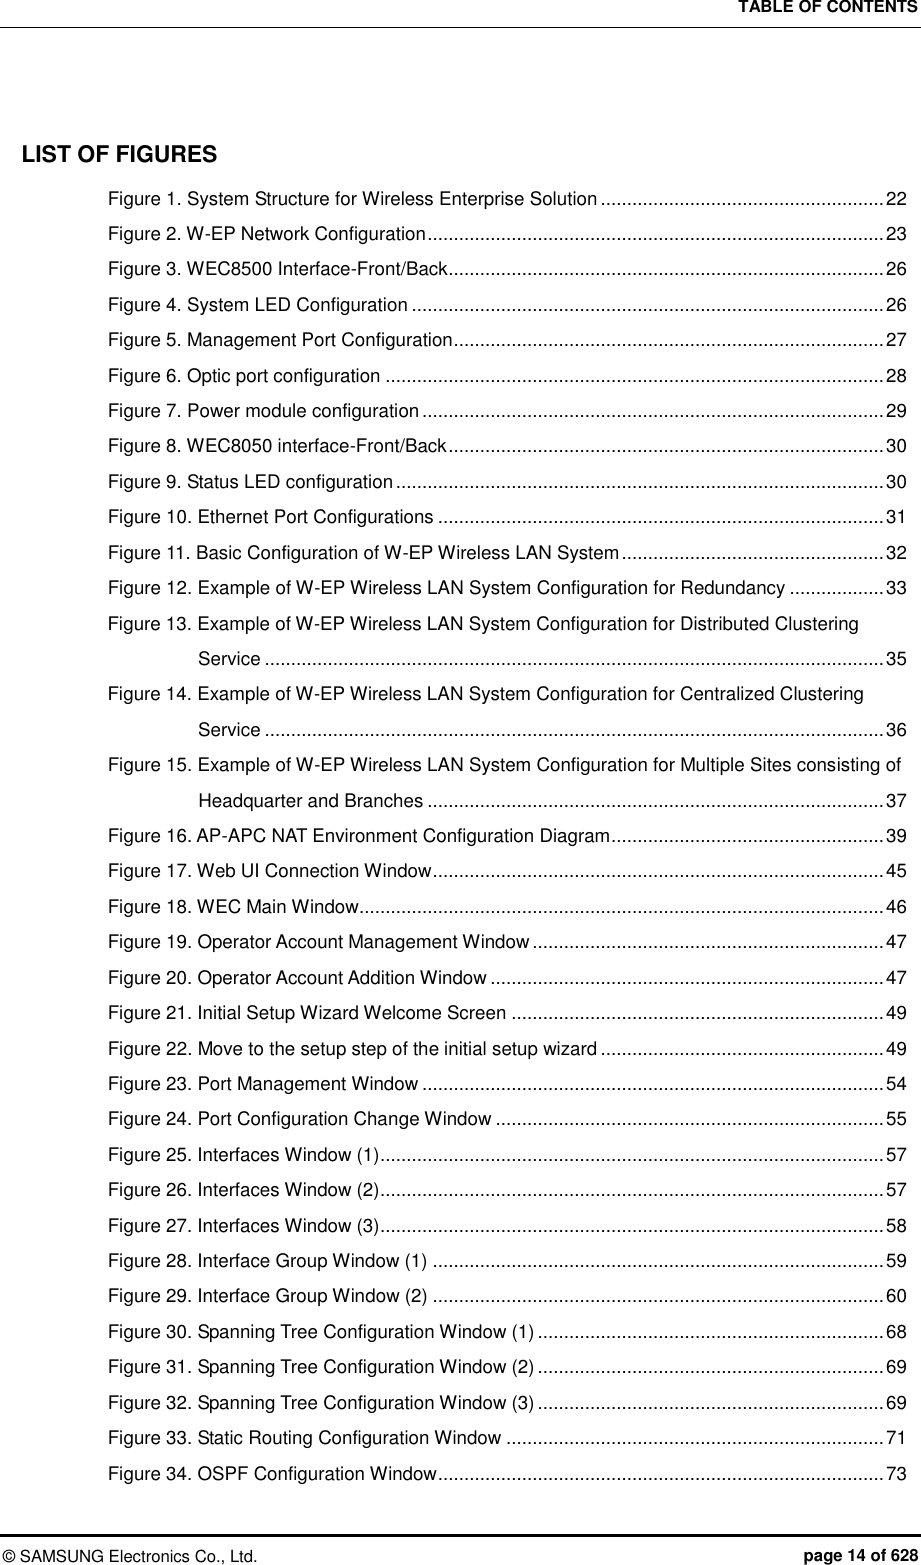 TABLE OF CONTENTS ©  SAMSUNG Electronics Co., Ltd.  page 14 of 628 LIST OF FIGURES Figure 1. System Structure for Wireless Enterprise Solution ...................................................... 22 Figure 2. W-EP Network Configuration ....................................................................................... 23 Figure 3. WEC8500 Interface-Front/Back ................................................................................... 26 Figure 4. System LED Configuration .......................................................................................... 26 Figure 5. Management Port Configuration .................................................................................. 27 Figure 6. Optic port configuration ............................................................................................... 28 Figure 7. Power module configuration ........................................................................................ 29 Figure 8. WEC8050 interface-Front/Back ................................................................................... 30 Figure 9. Status LED configuration ............................................................................................. 30 Figure 10. Ethernet Port Configurations ..................................................................................... 31 Figure 11. Basic Configuration of W-EP Wireless LAN System .................................................. 32 Figure 12. Example of W-EP Wireless LAN System Configuration for Redundancy .................. 33 Figure 13. Example of W-EP Wireless LAN System Configuration for Distributed Clustering Service ...................................................................................................................... 35 Figure 14. Example of W-EP Wireless LAN System Configuration for Centralized Clustering Service ...................................................................................................................... 36 Figure 15. Example of W-EP Wireless LAN System Configuration for Multiple Sites consisting of Headquarter and Branches ....................................................................................... 37 Figure 16. AP-APC NAT Environment Configuration Diagram .................................................... 39 Figure 17. Web UI Connection Window ...................................................................................... 45 Figure 18. WEC Main Window .................................................................................................... 46 Figure 19. Operator Account Management Window ................................................................... 47 Figure 20. Operator Account Addition Window ........................................................................... 47 Figure 21. Initial Setup Wizard Welcome Screen ....................................................................... 49 Figure 22. Move to the setup step of the initial setup wizard ...................................................... 49 Figure 23. Port Management Window ........................................................................................ 54 Figure 24. Port Configuration Change Window .......................................................................... 55 Figure 25. Interfaces Window (1) ................................................................................................ 57 Figure 26. Interfaces Window (2) ................................................................................................ 57 Figure 27. Interfaces Window (3) ................................................................................................ 58 Figure 28. Interface Group Window (1) ...................................................................................... 59 Figure 29. Interface Group Window (2) ...................................................................................... 60 Figure 30. Spanning Tree Configuration Window (1) .................................................................. 68 Figure 31. Spanning Tree Configuration Window (2) .................................................................. 69 Figure 32. Spanning Tree Configuration Window (3) .................................................................. 69 Figure 33. Static Routing Configuration Window ........................................................................ 71 Figure 34. OSPF Configuration Window ..................................................................................... 73 